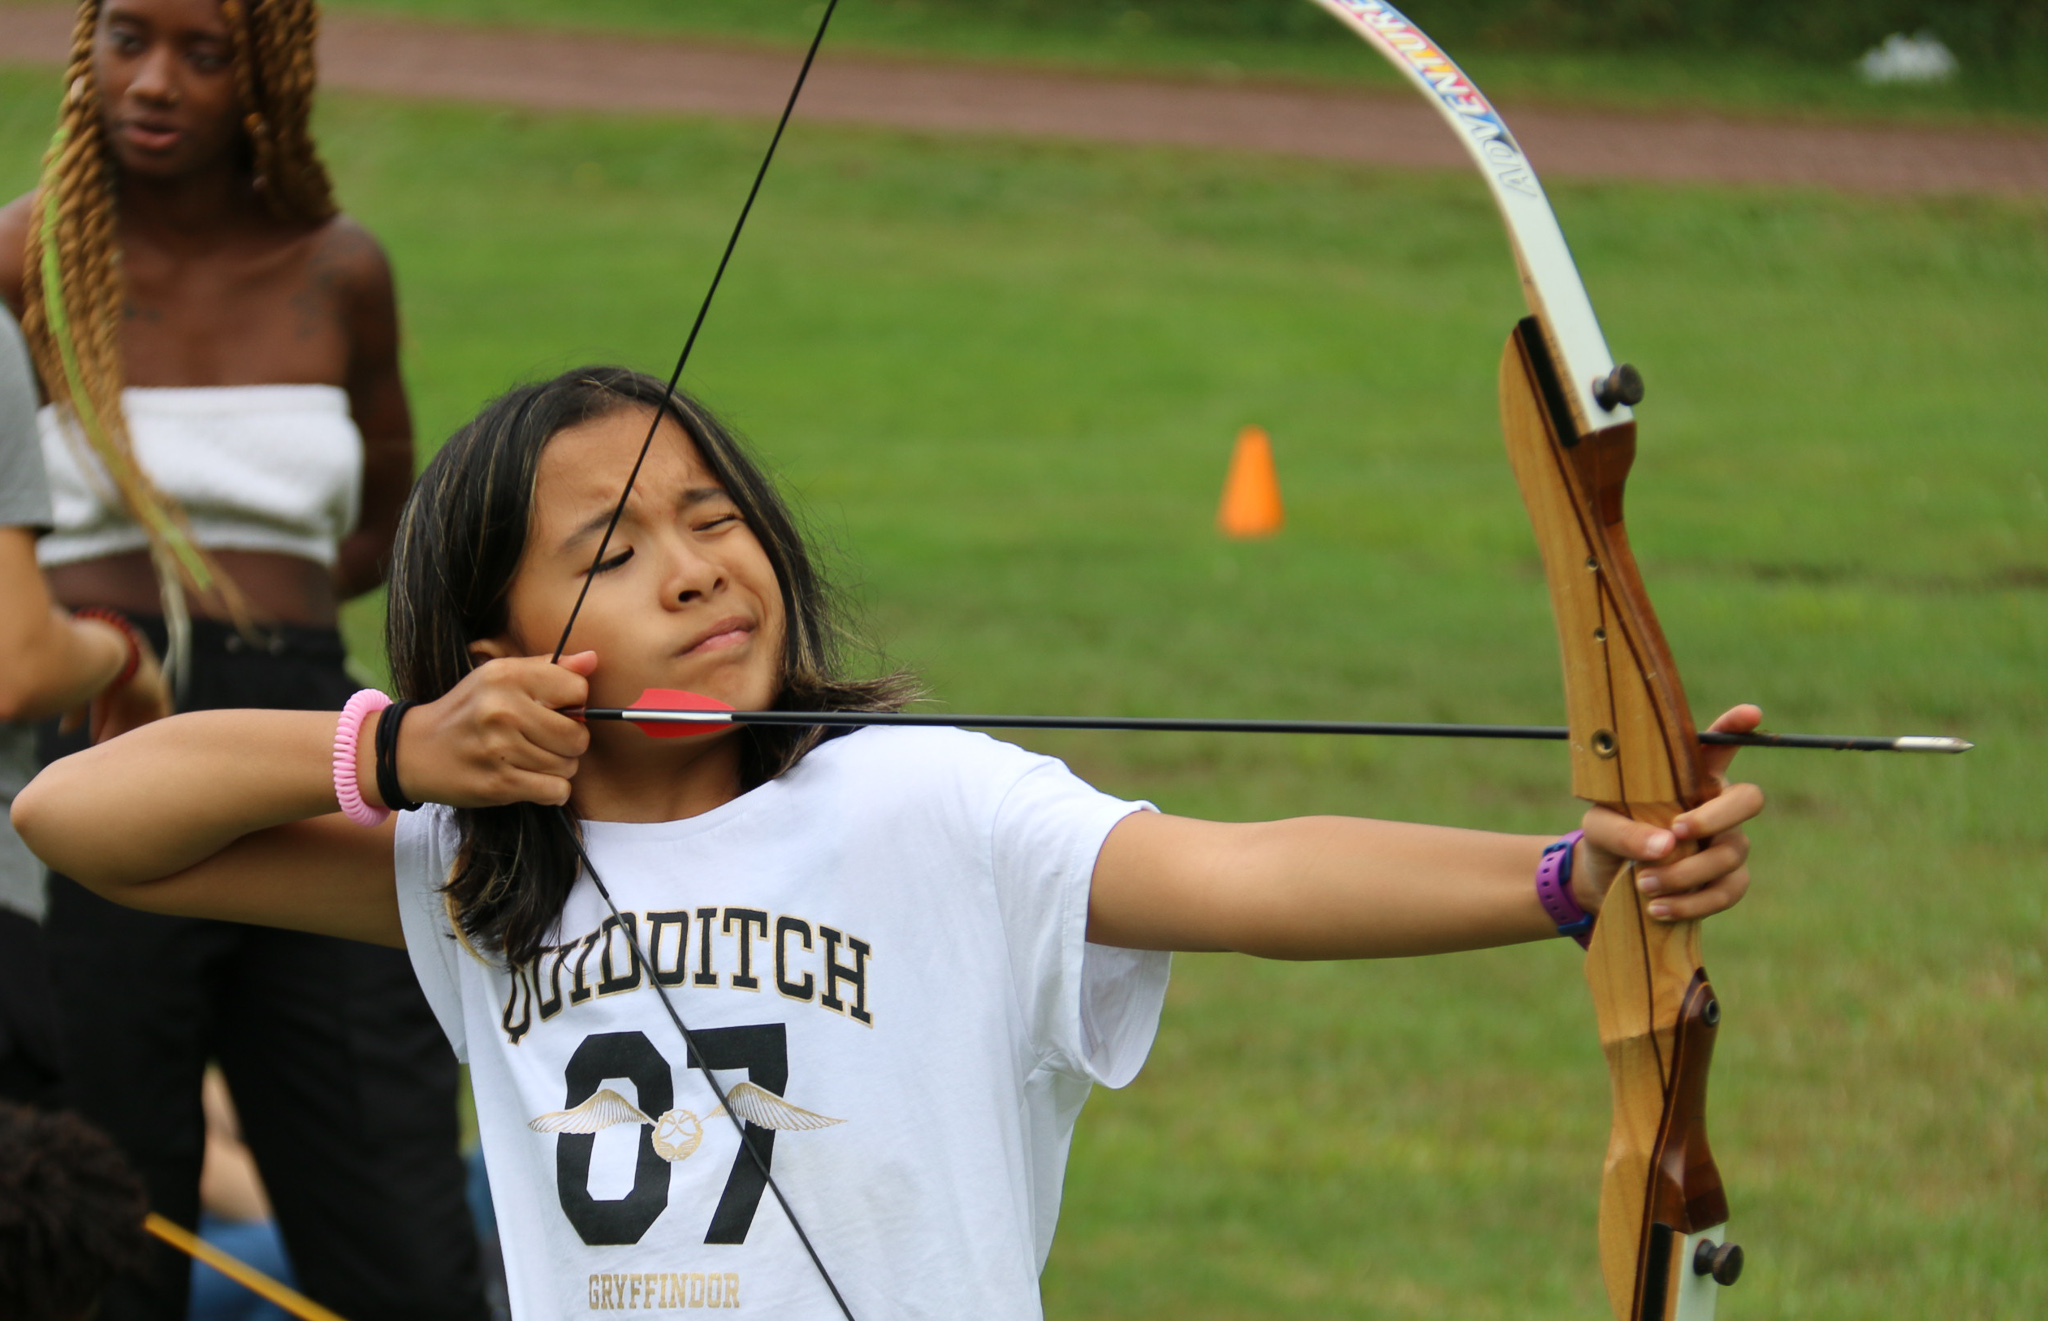 Camper shooting a bow and arrow